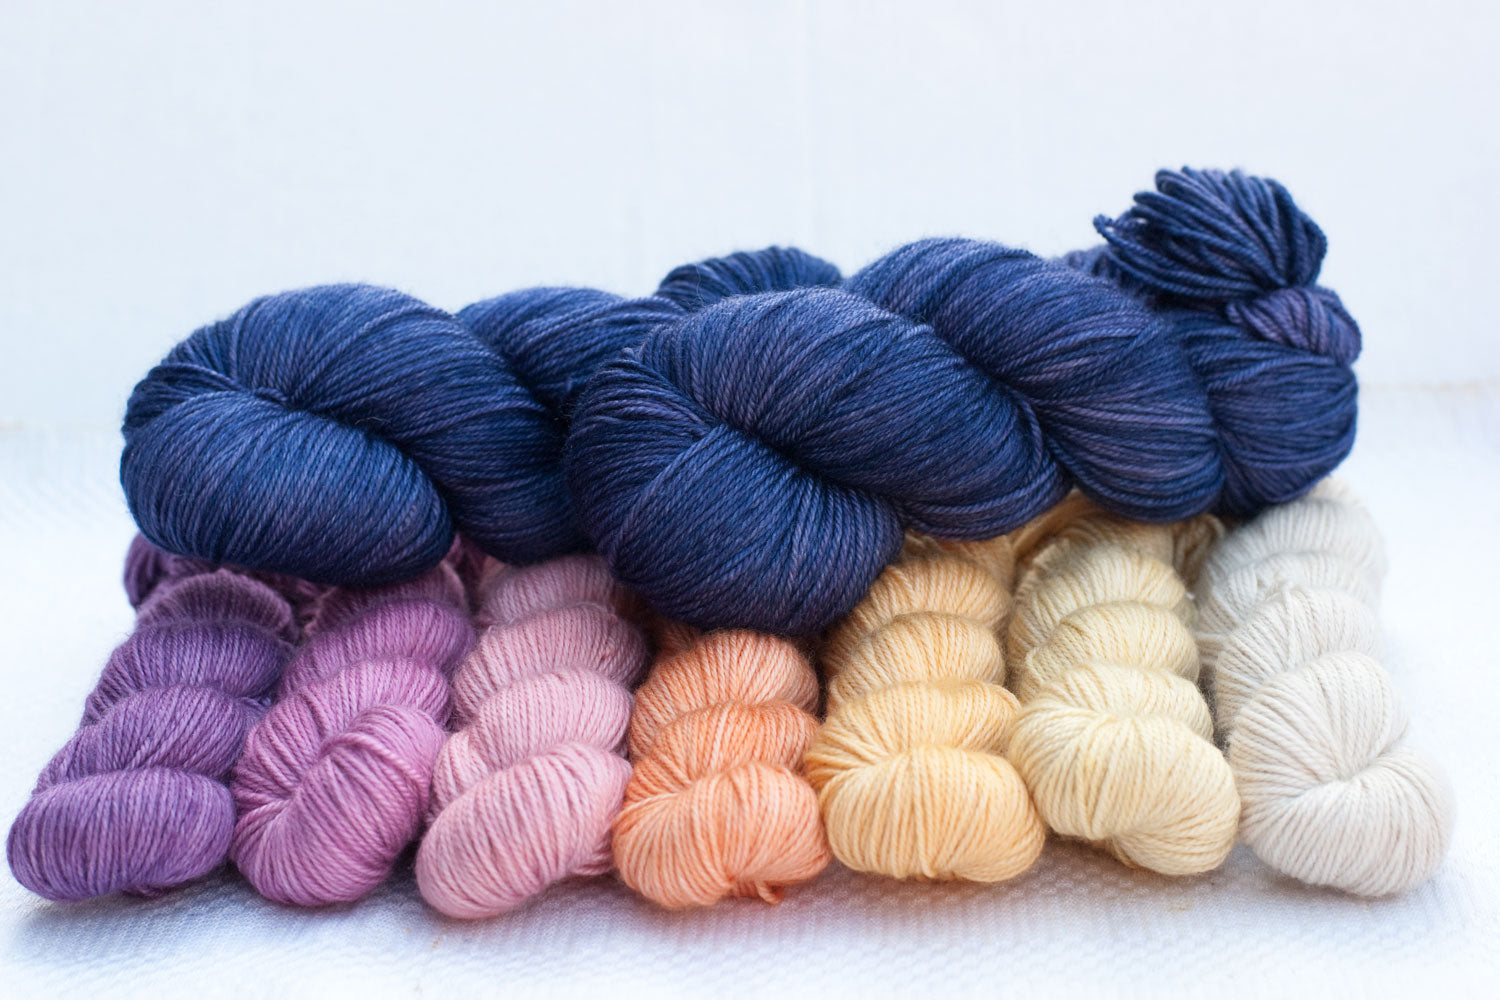 2 full skeins of dark purple yarn contrasted with a purple, pink, peach and cream gradient set